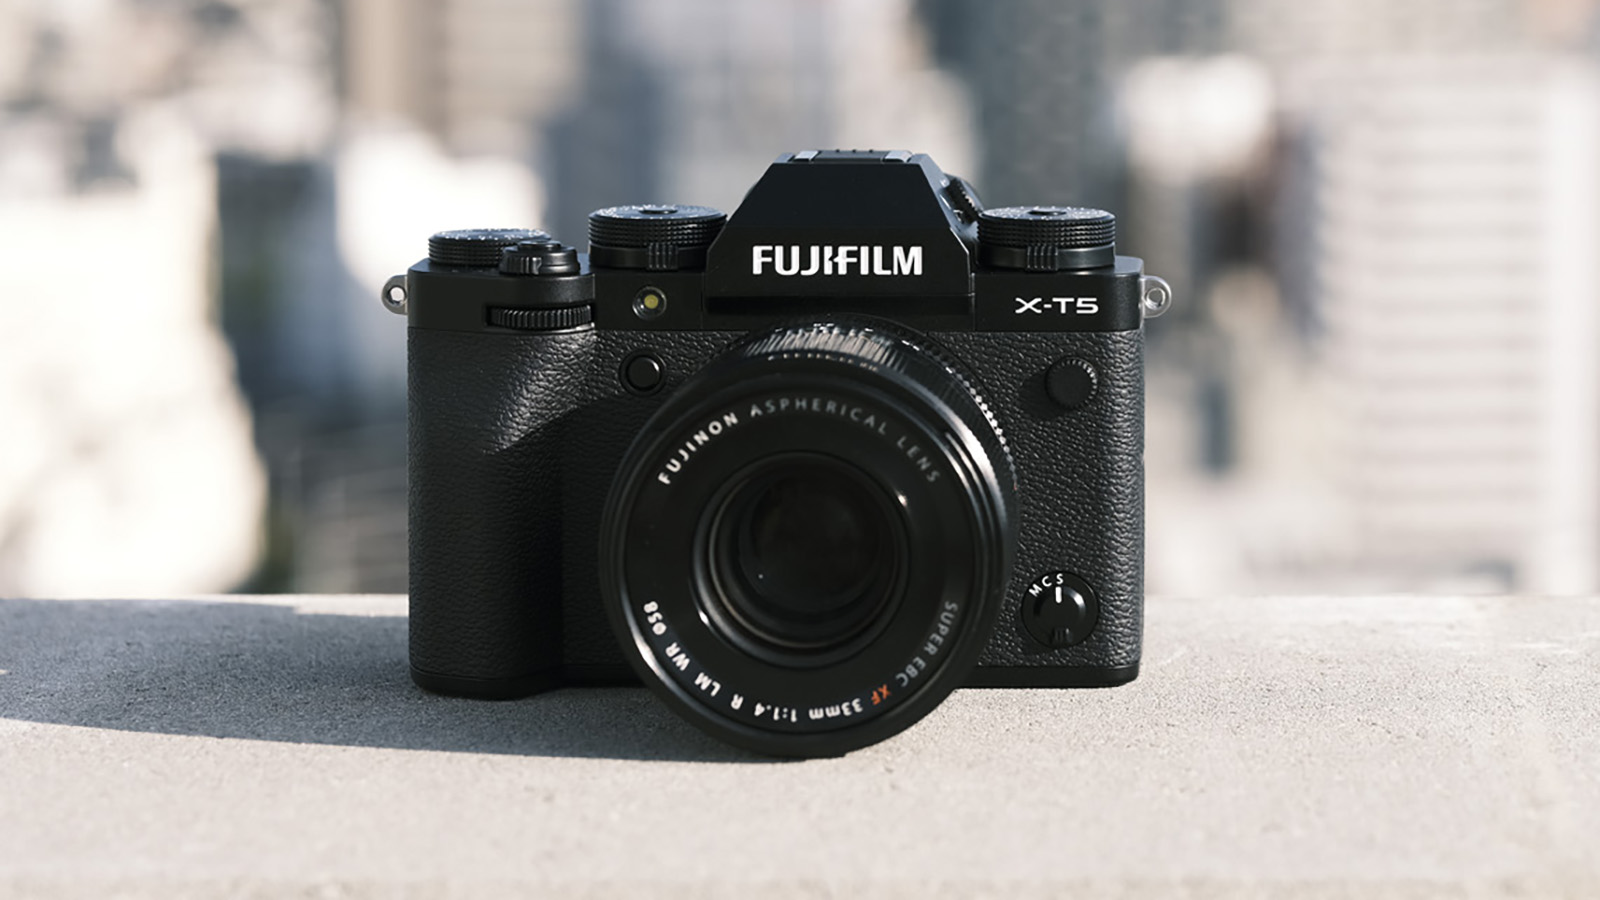 Can the Fujifilm XT-5 keep up with Full Frame?